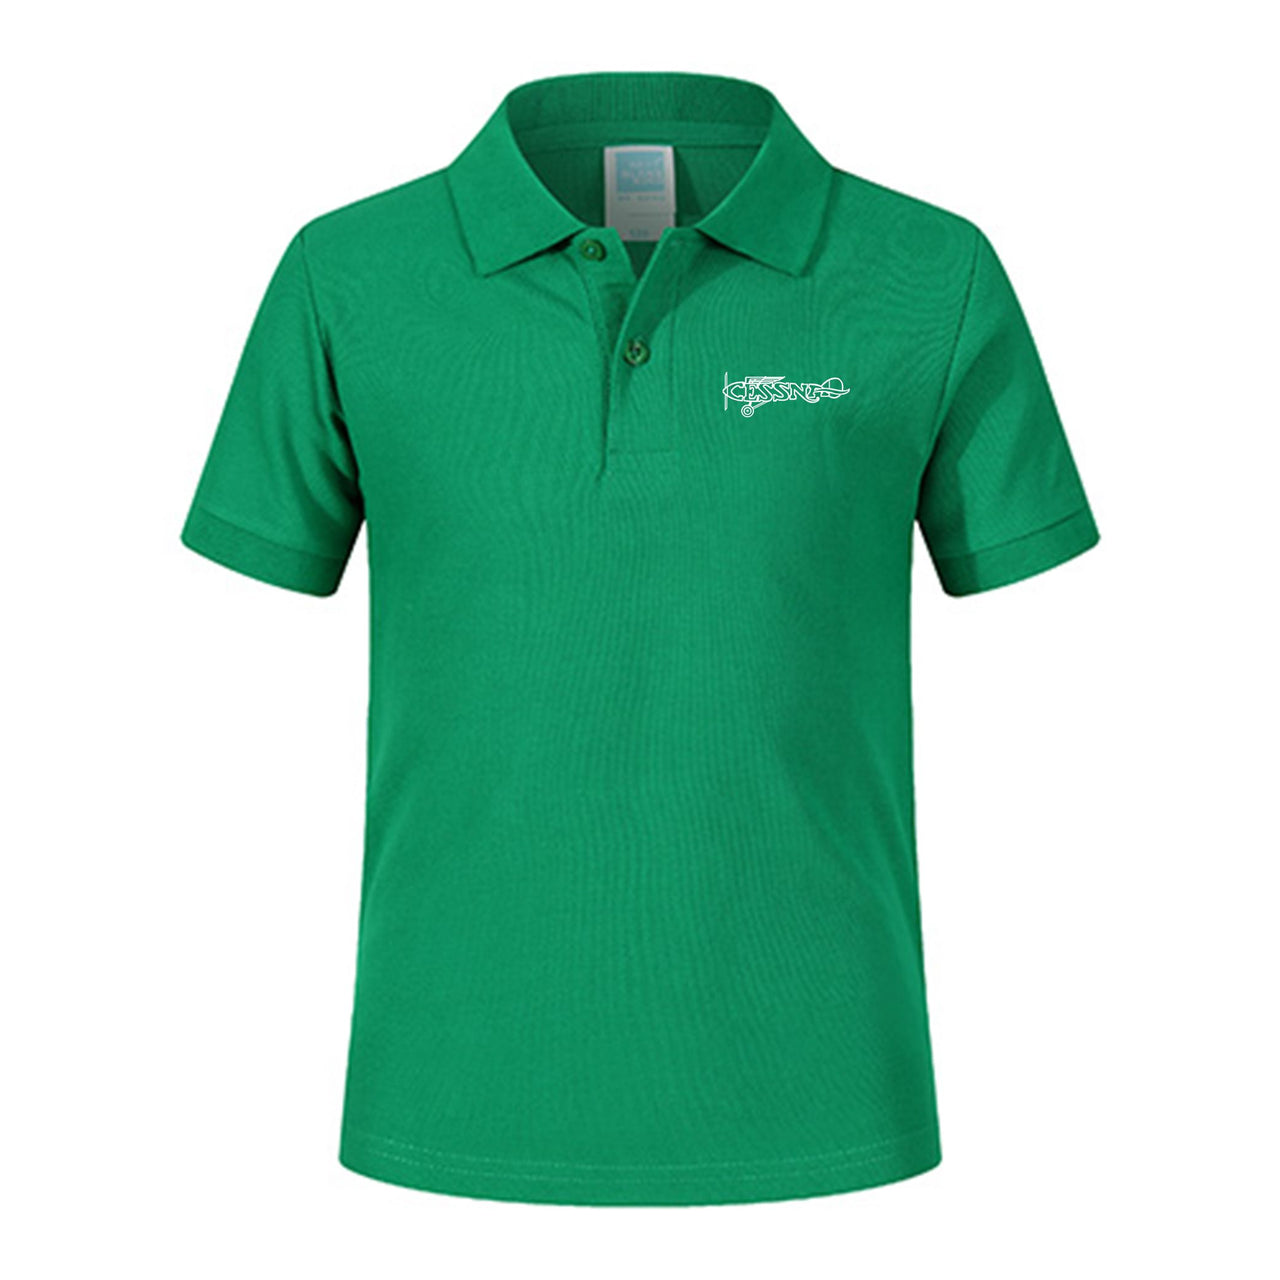 Special Cessna Text Designed Children Polo T-Shirts